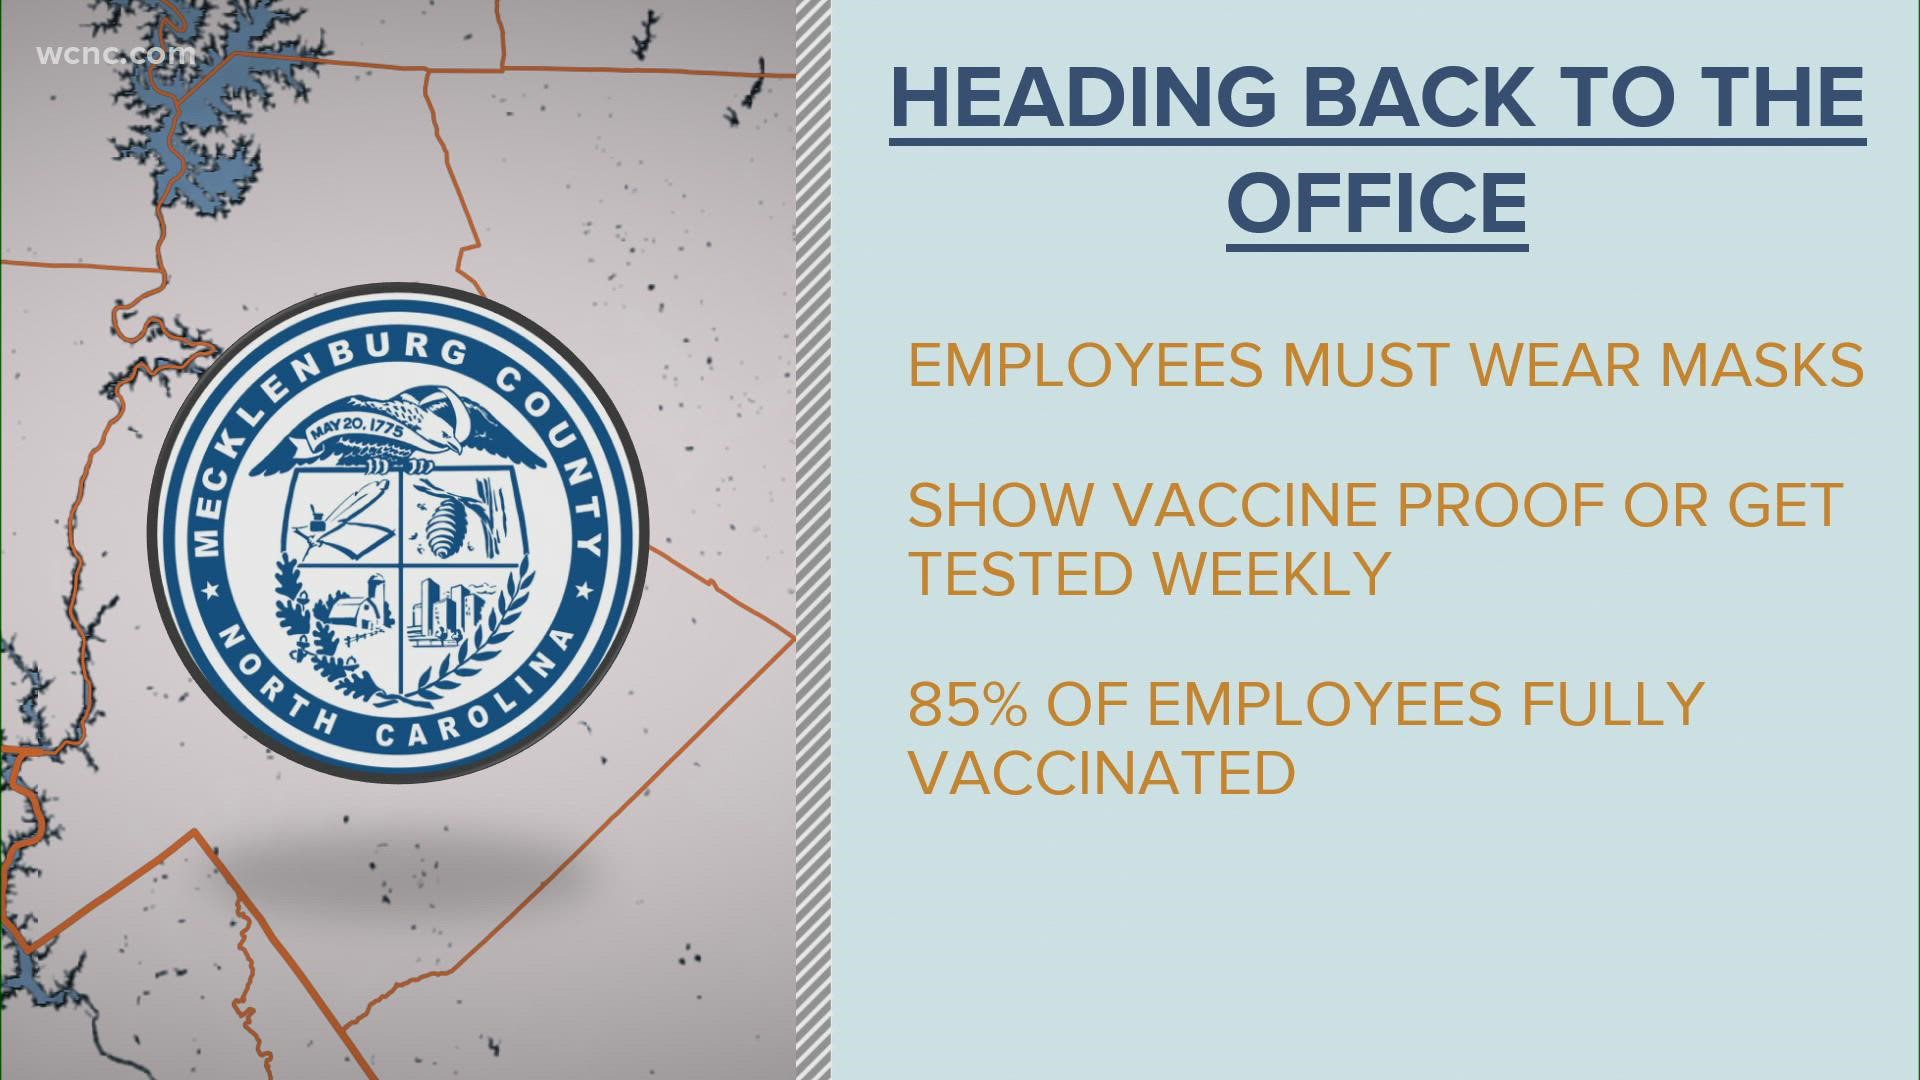 County employees will still be required to wear face masks regardless of vaccination status, and either have to show proof of vaccination or get tested weekly.